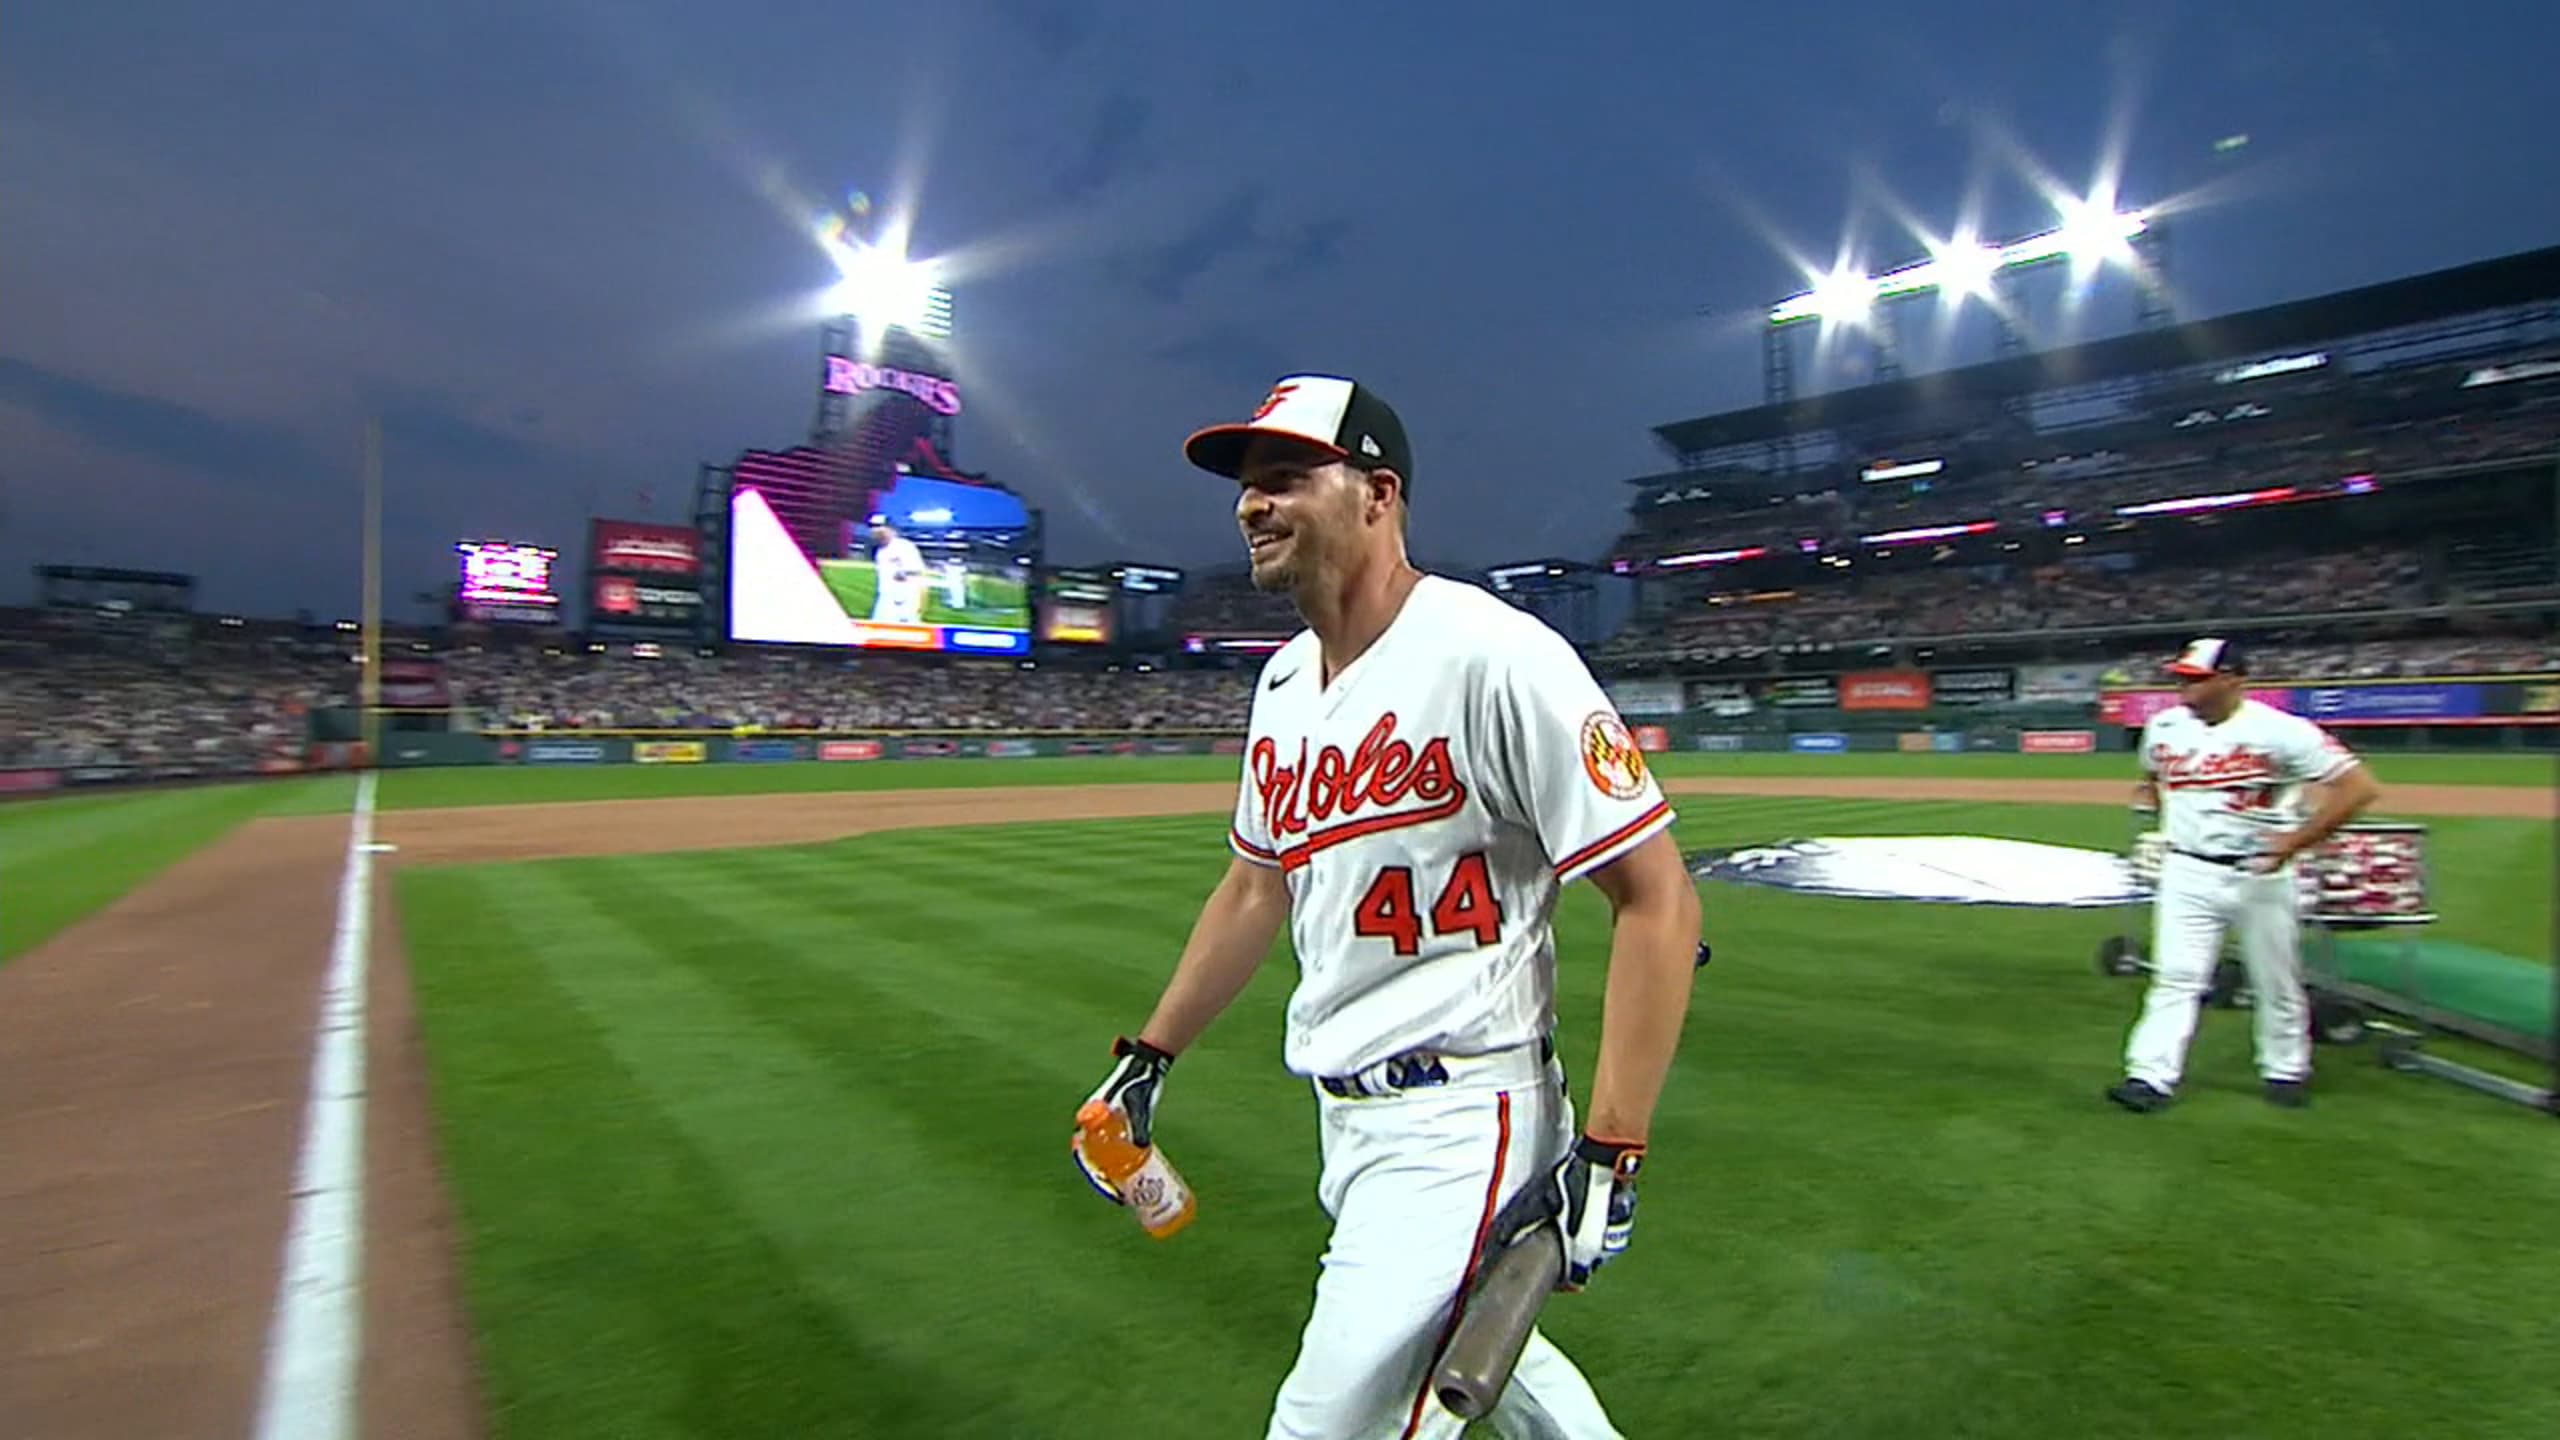 Pete Alonso defends Home Run Derby title, beats Trey Mancini in finals